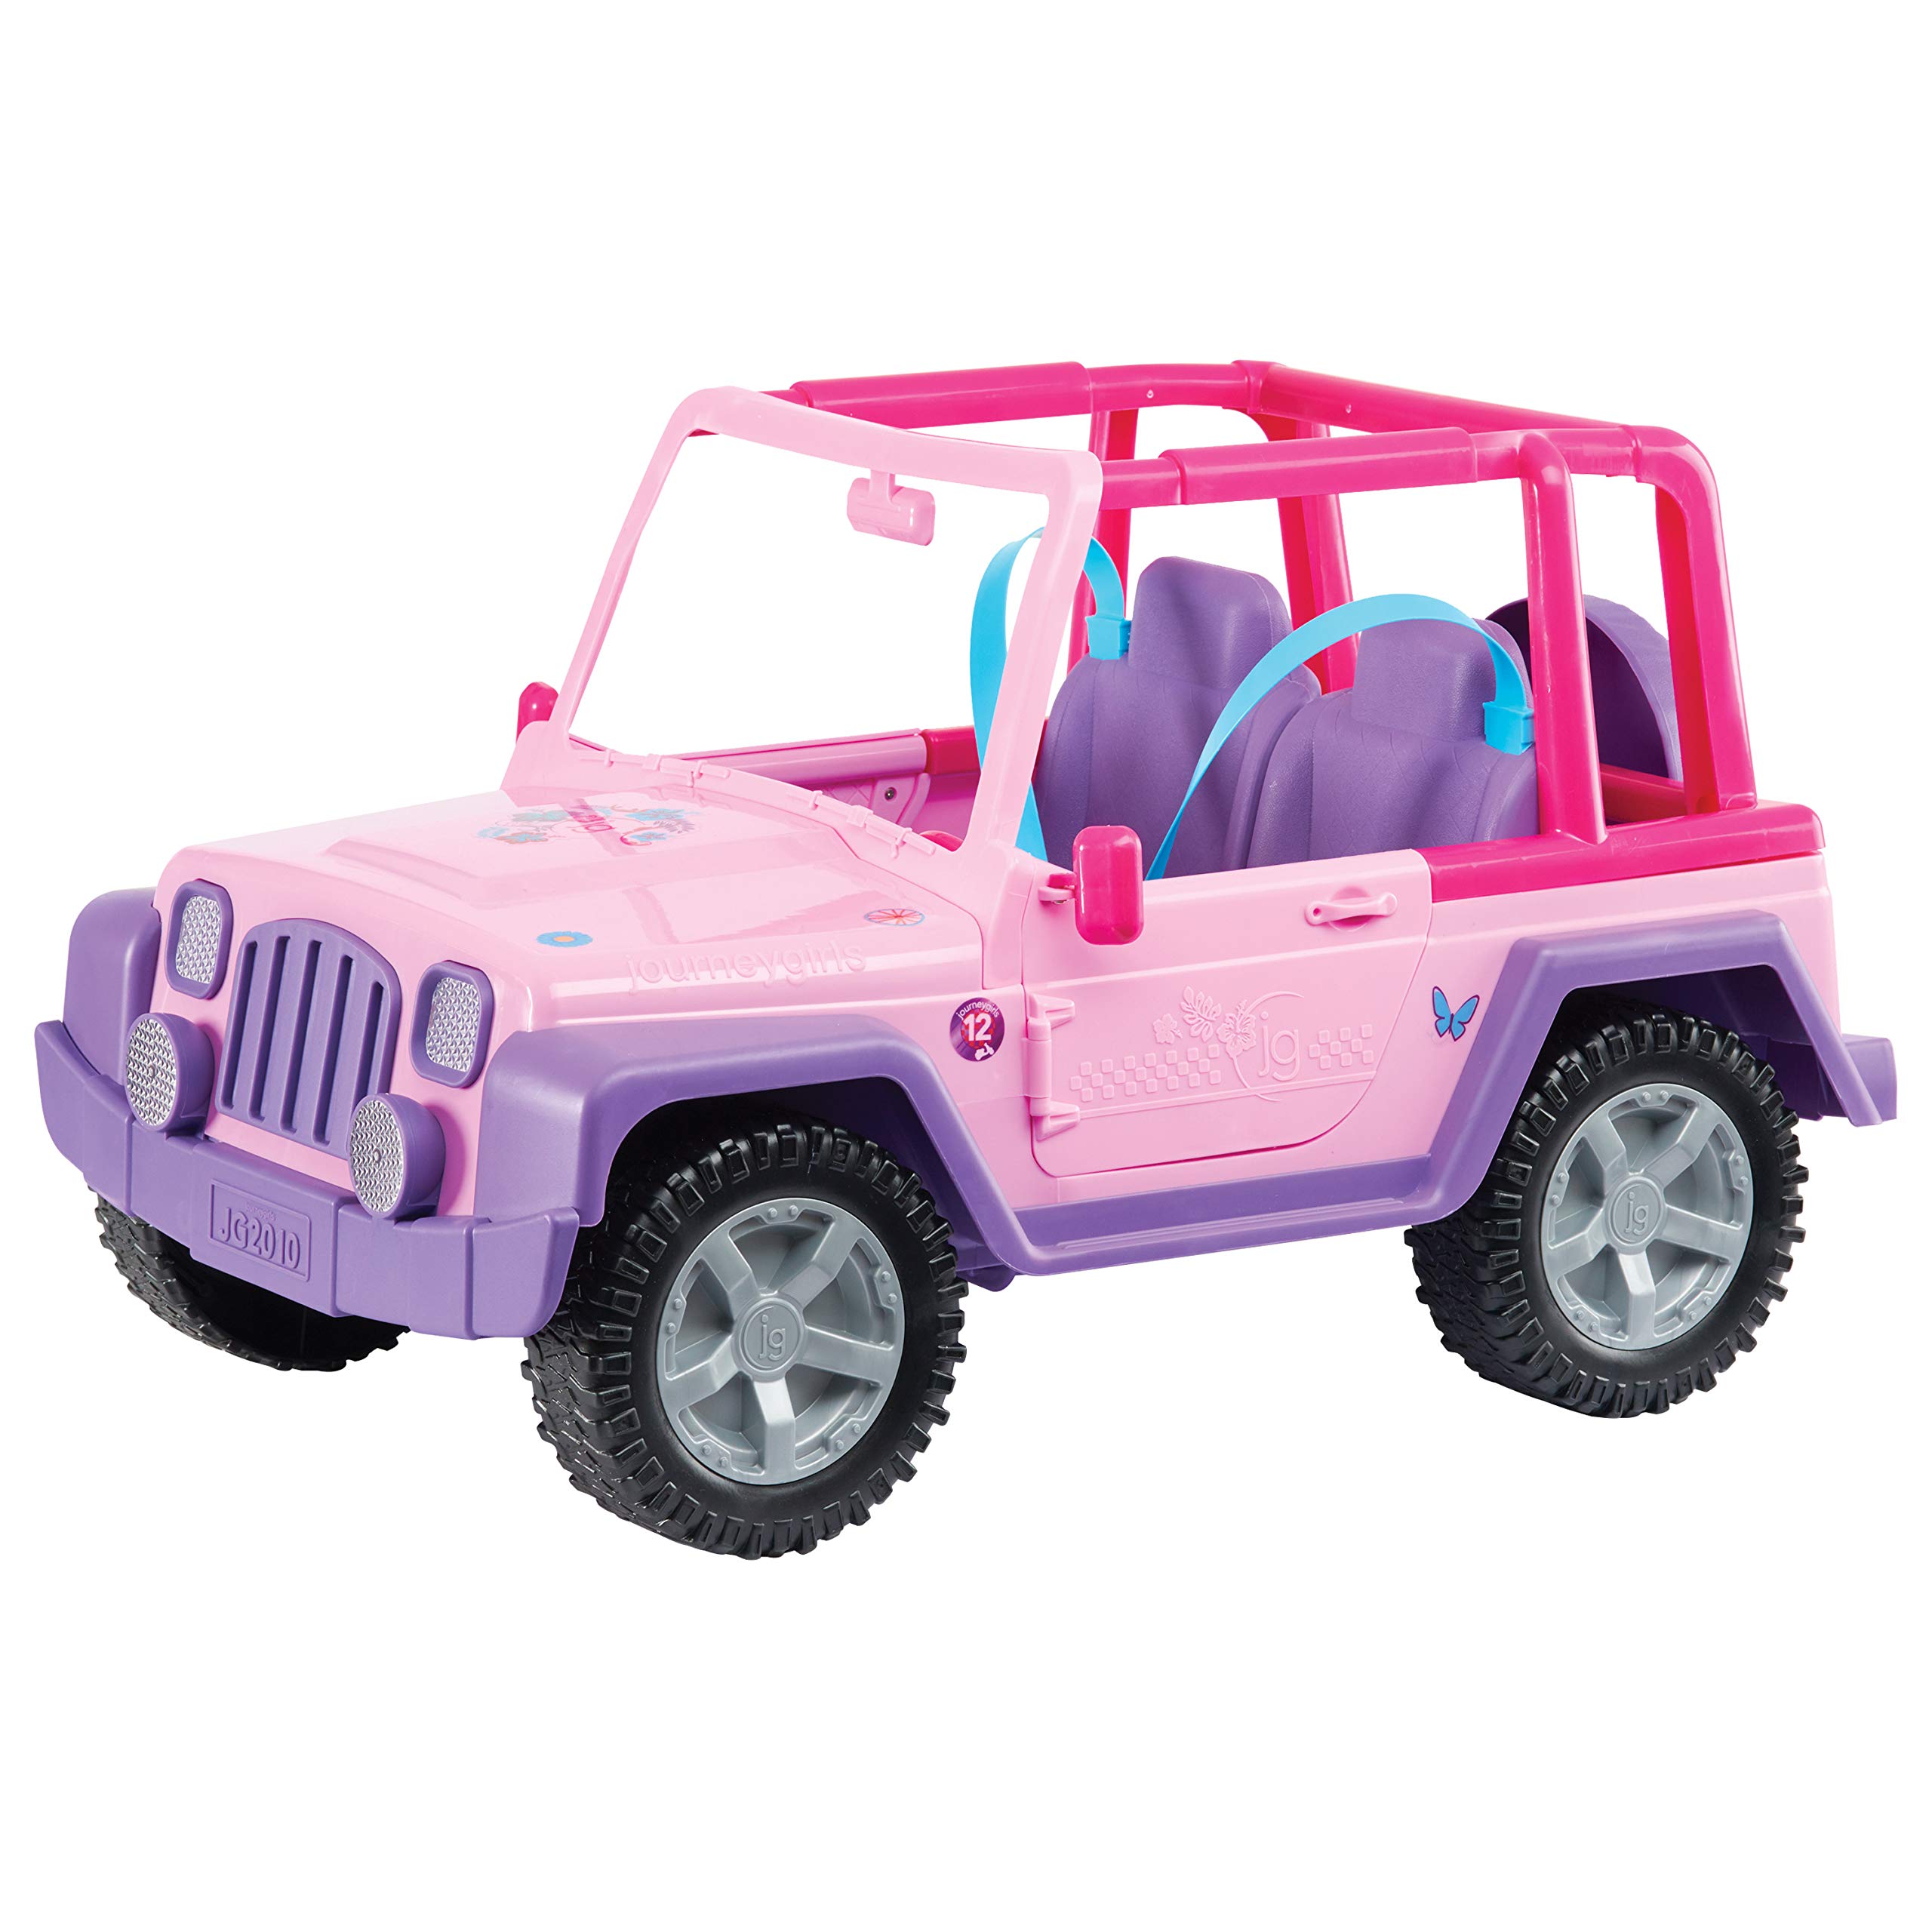 Journey Girls Outback 4-Wheel Vehicle, Kids Toys for Ages 6 Up, Gifts and Presents by Just Play